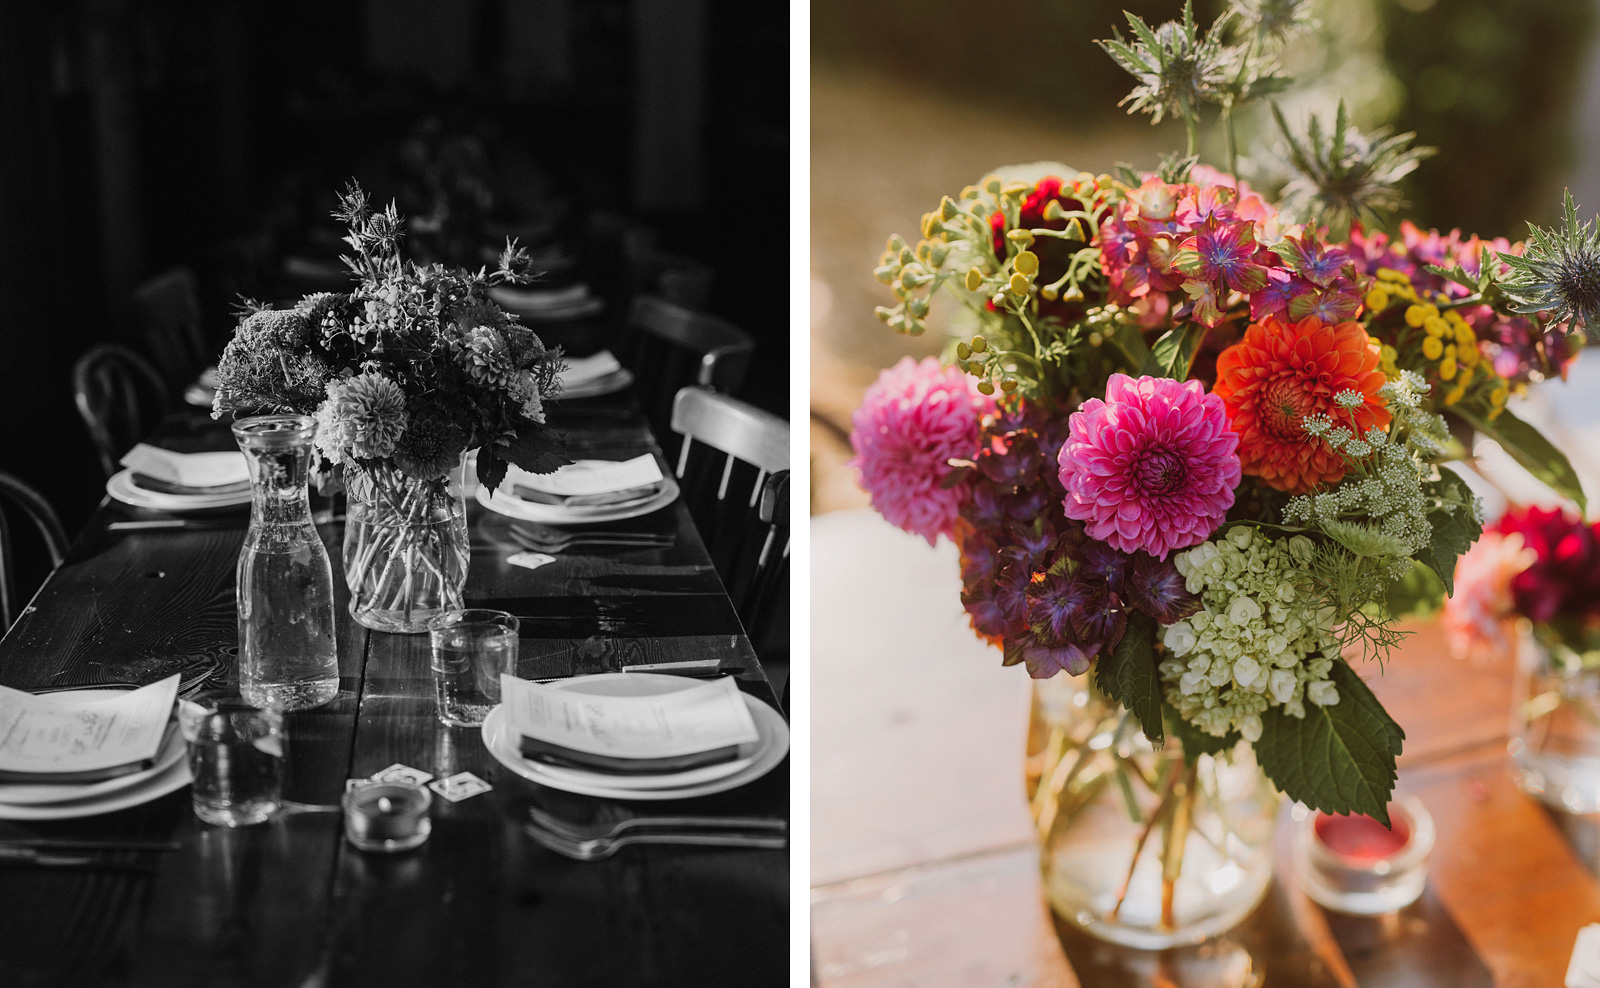 Elder Hall flowers and centerpieces at an intimate Ned Ludd wedding